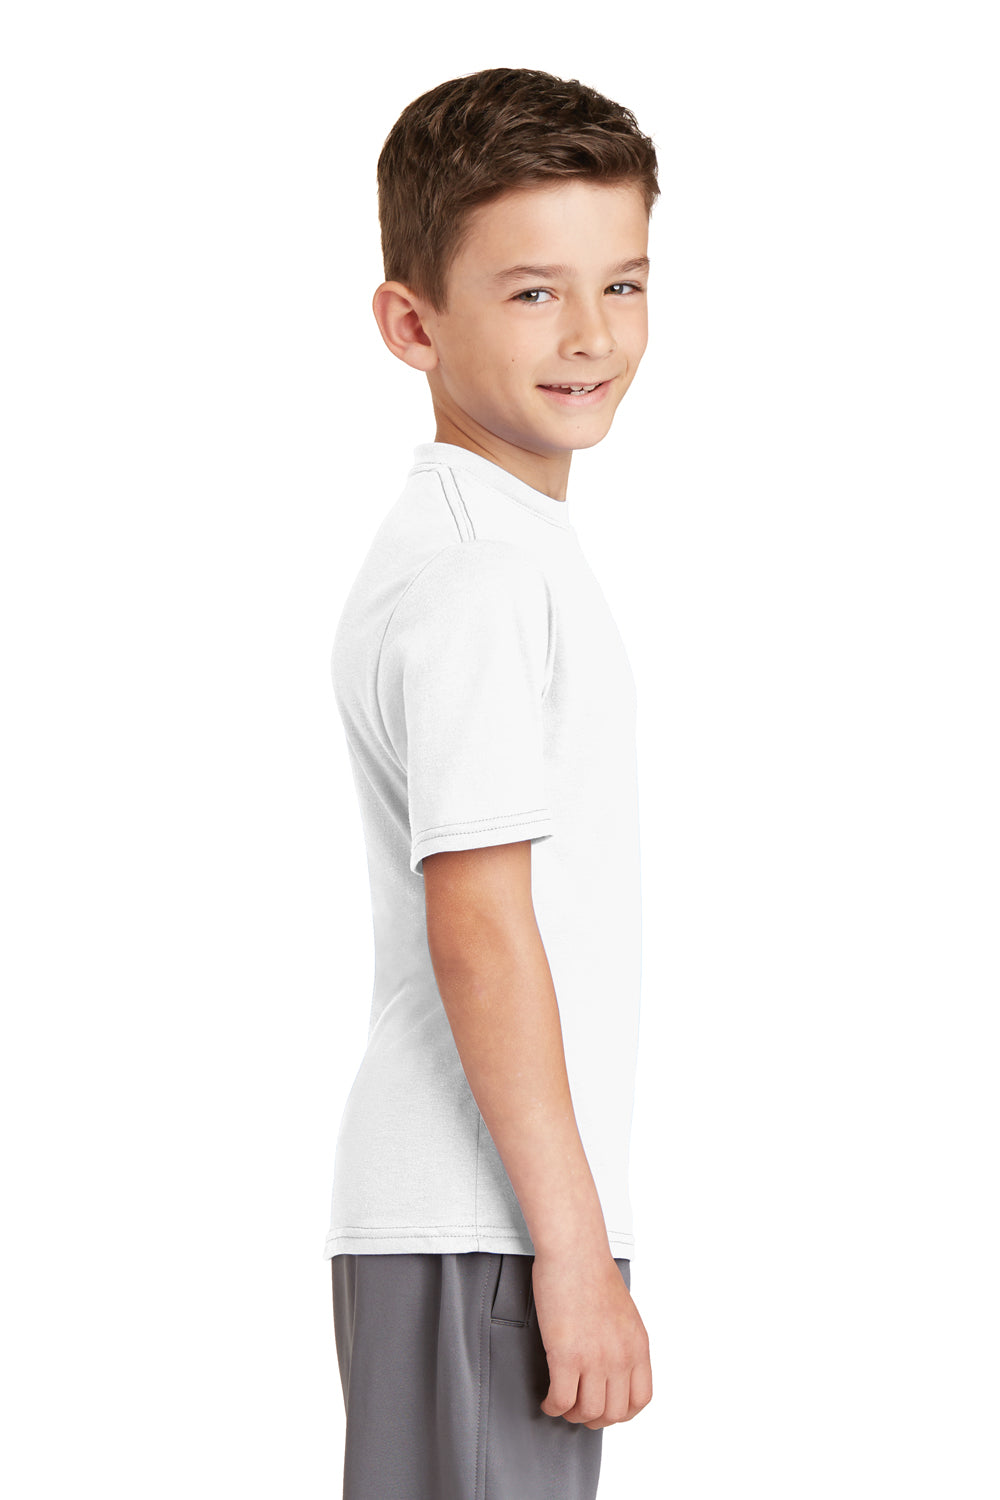 Port & Company PC381Y Youth Dry Zone Performance Moisture Wicking Short Sleeve Crewneck T-Shirt White Side